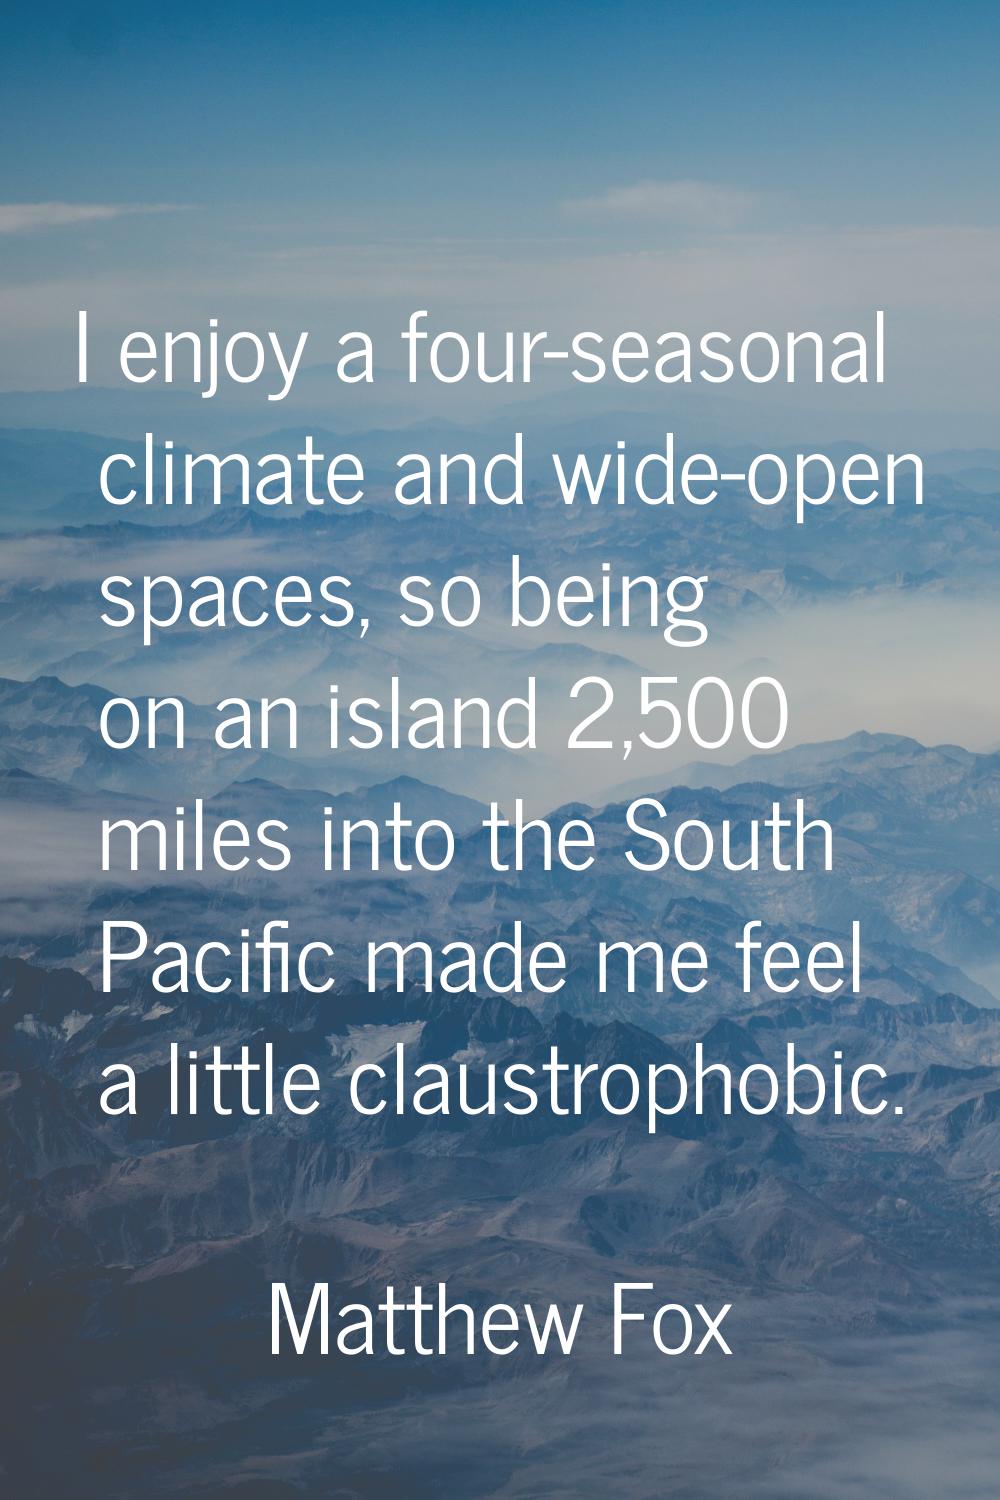 I enjoy a four-seasonal climate and wide-open spaces, so being on an island 2,500 miles into the So